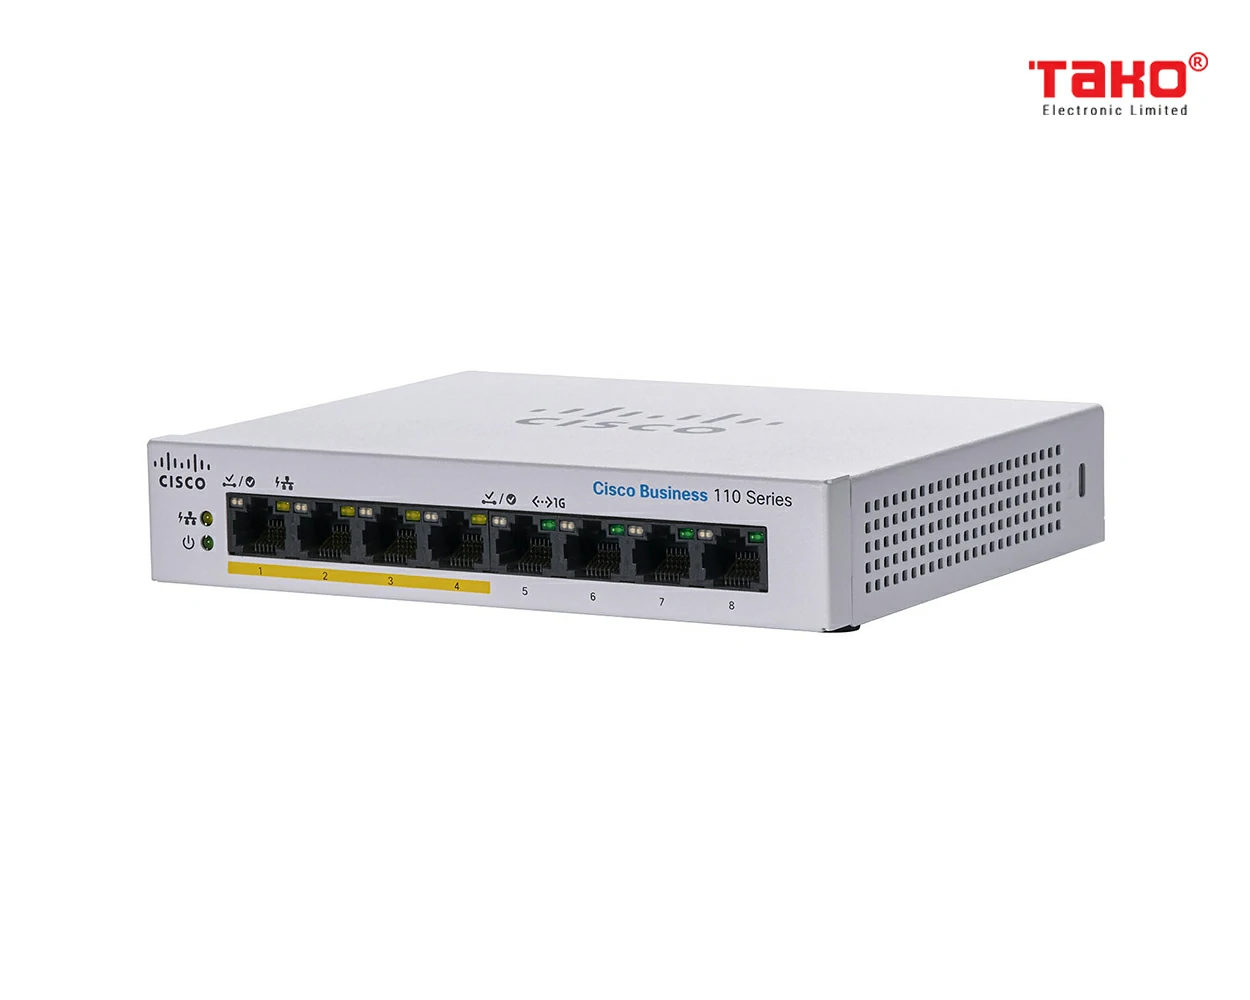 Cisco CBS110-8PP-D 8 port 10/100/1000 Mbps unmanageable switch, 4 of which are PoE 2